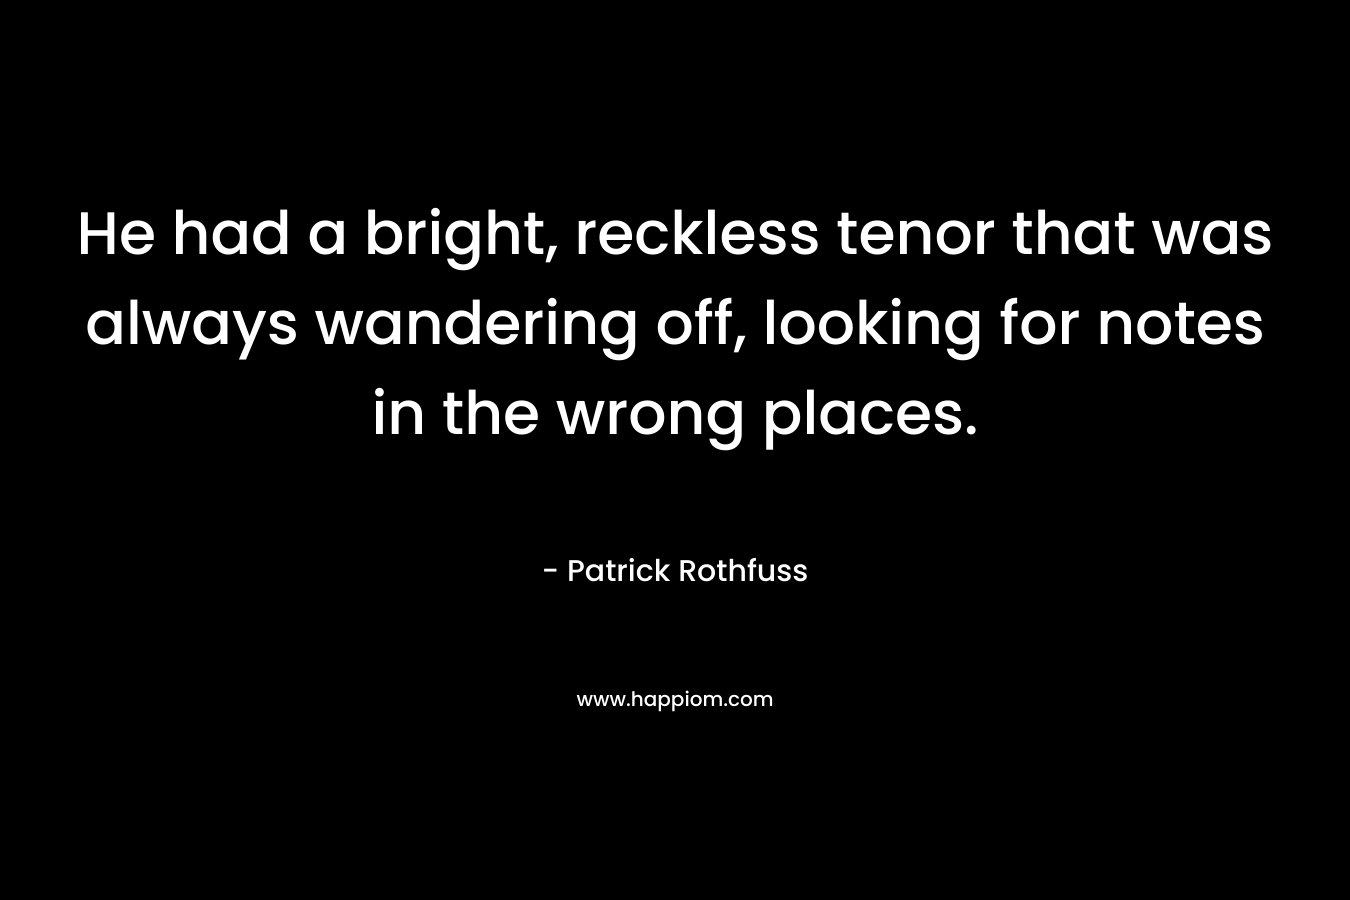 He had a bright, reckless tenor that was always wandering off, looking for notes in the wrong places. – Patrick Rothfuss